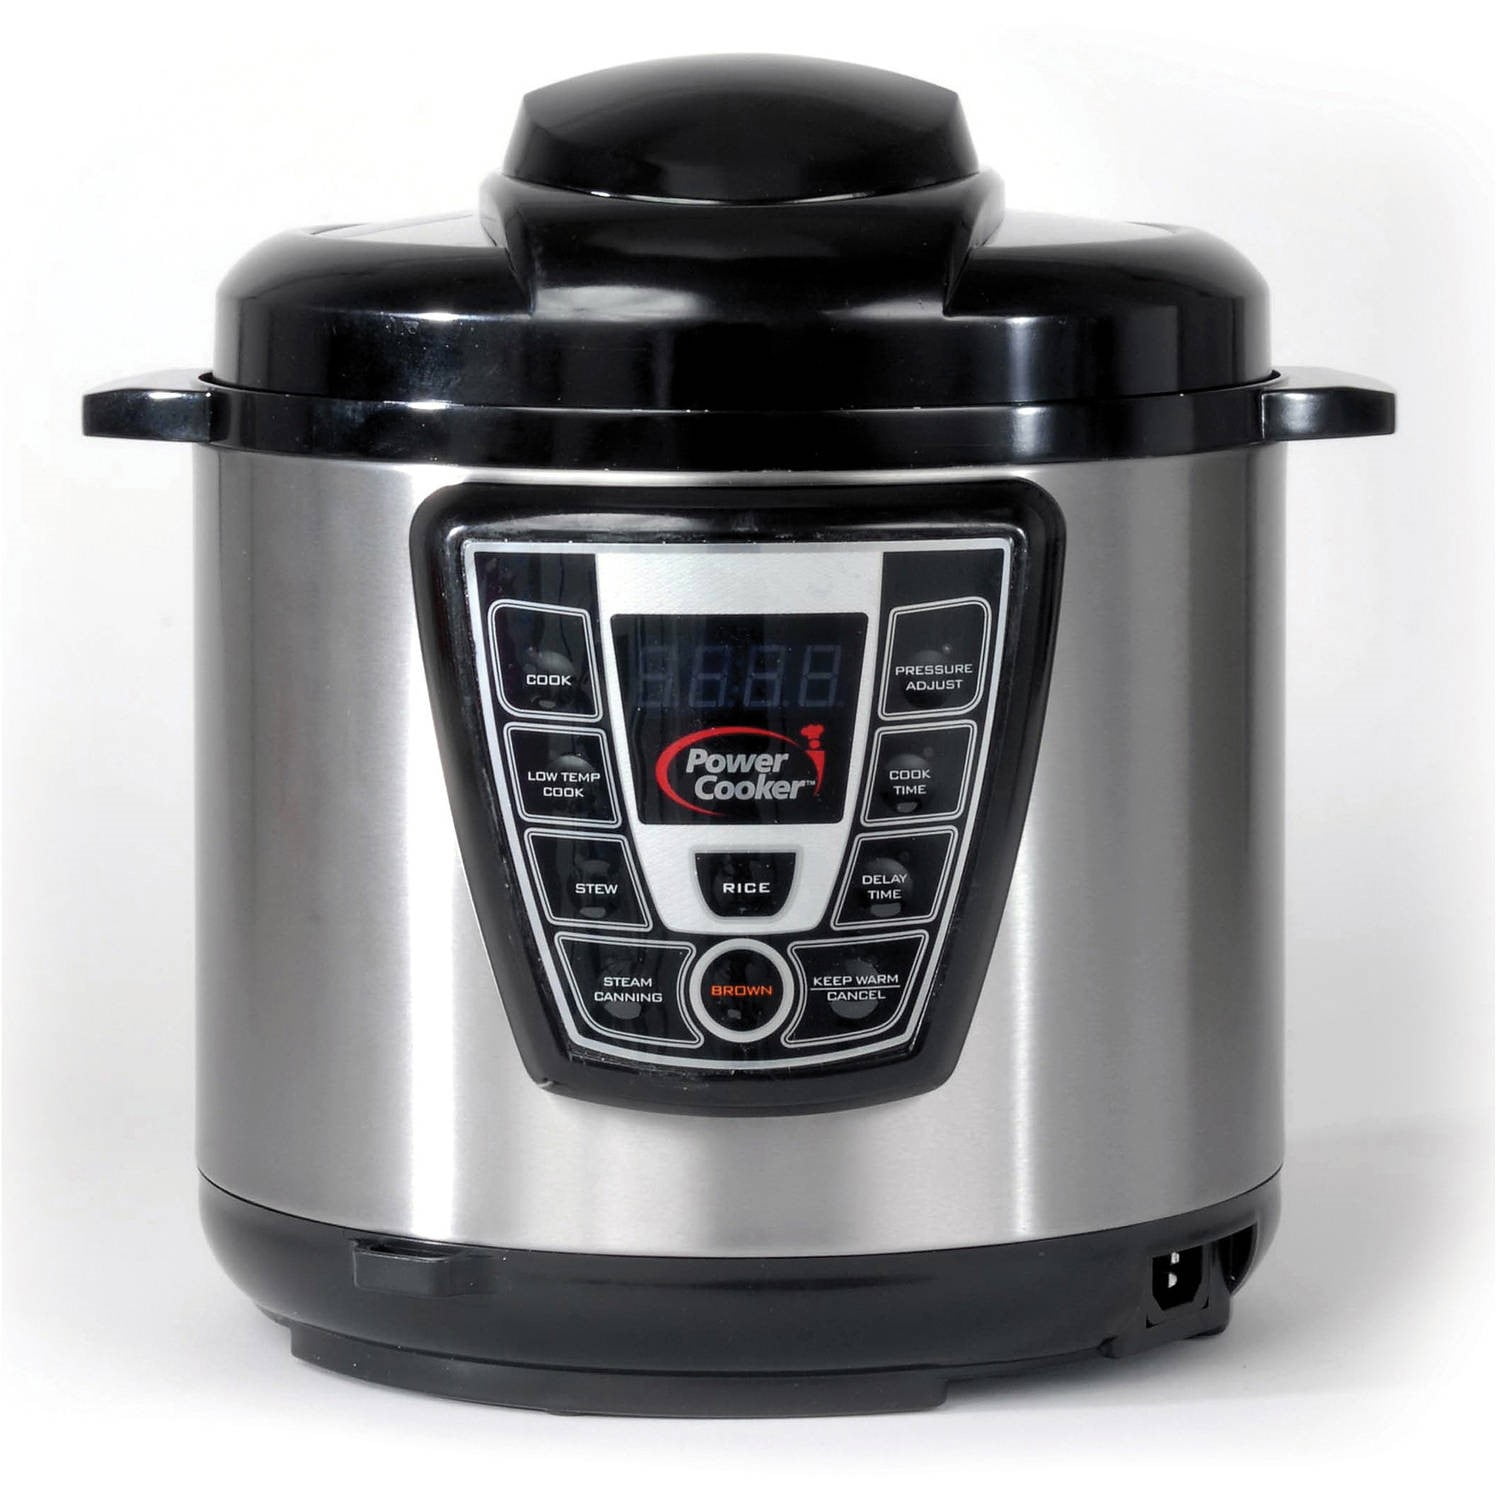 Power Pressure Cooker XL 6-Qt. Quart One Touch Cooking As Seen On TV PPC770  used